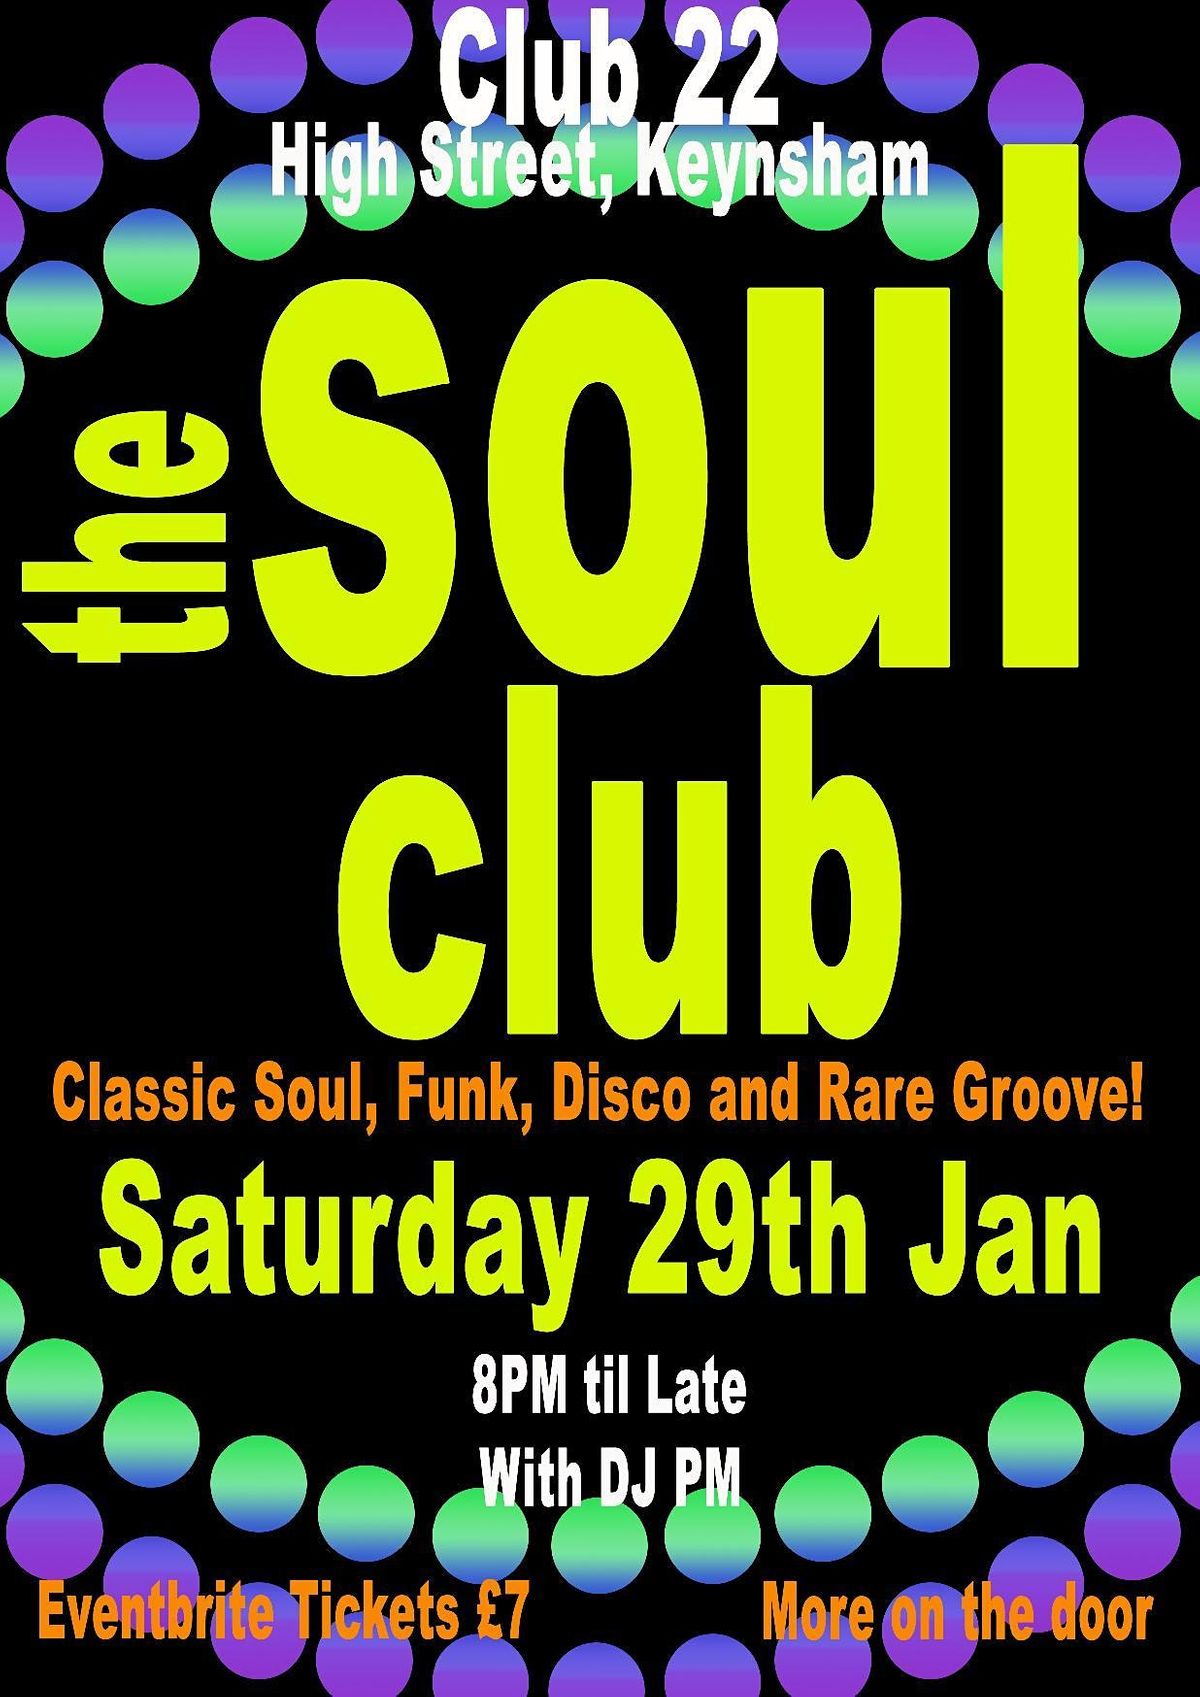 The Soul Club - It's Time To Dance